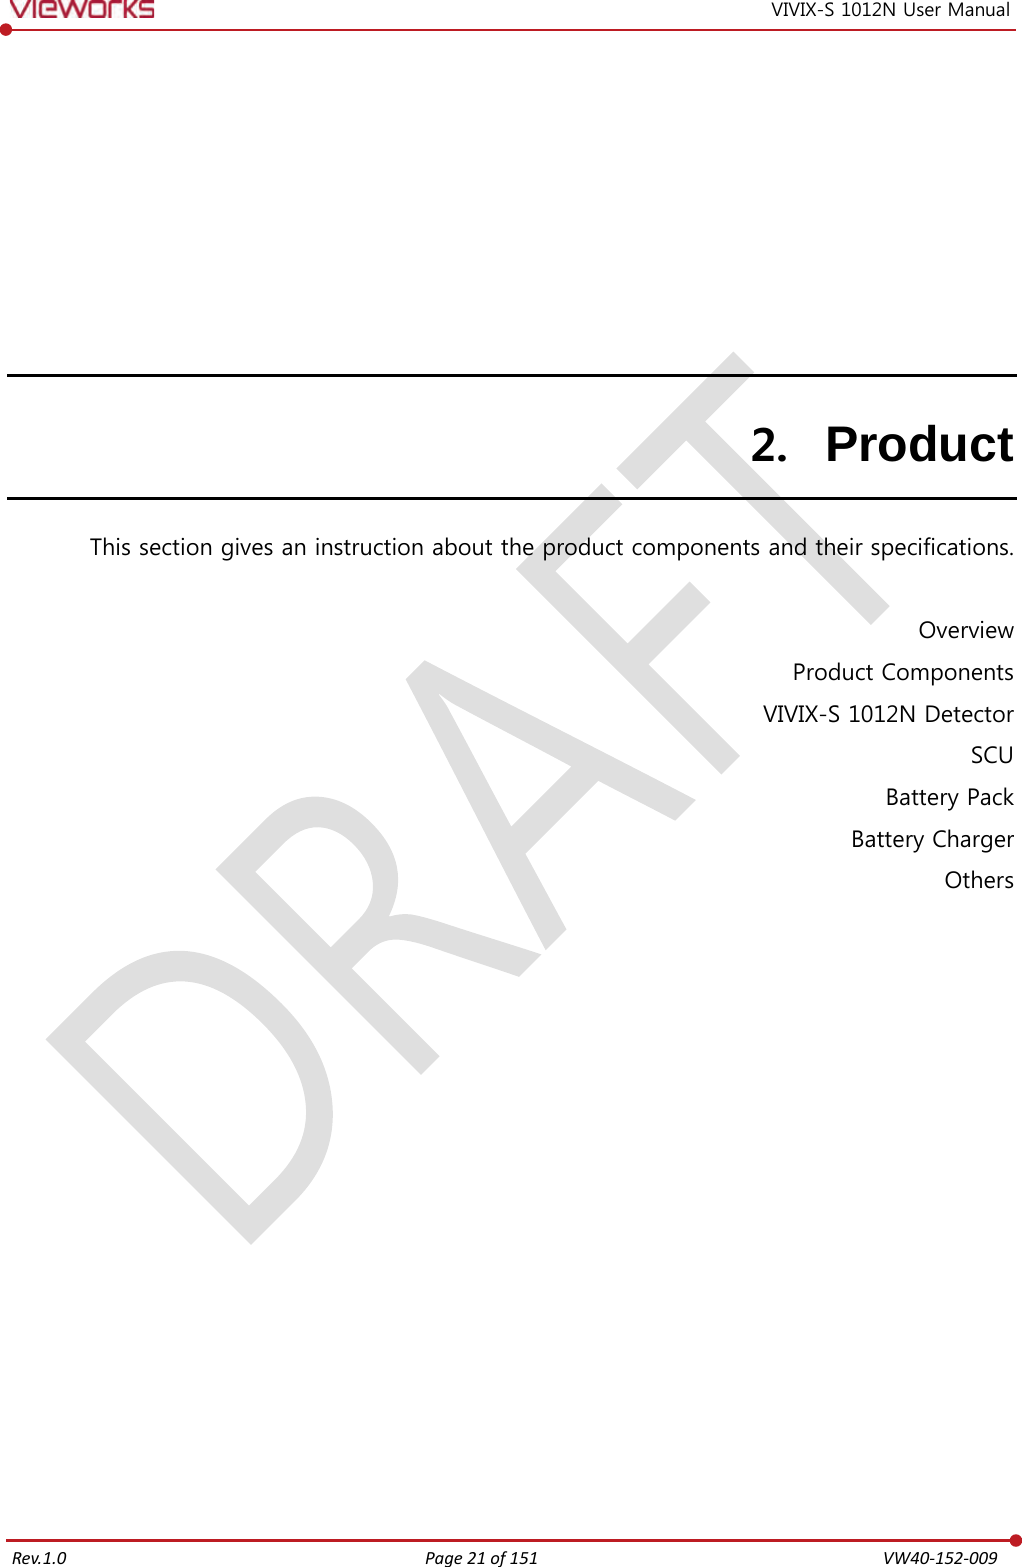   Rev.1.0 Page 21 of 151  VW40-152-009 VIVIX-S 1012N User Manual 2. Product This section gives an instruction about the product components and their specifications.  Overview Product Components VIVIX-S 1012N Detector SCU Battery Pack Battery Charger Others     